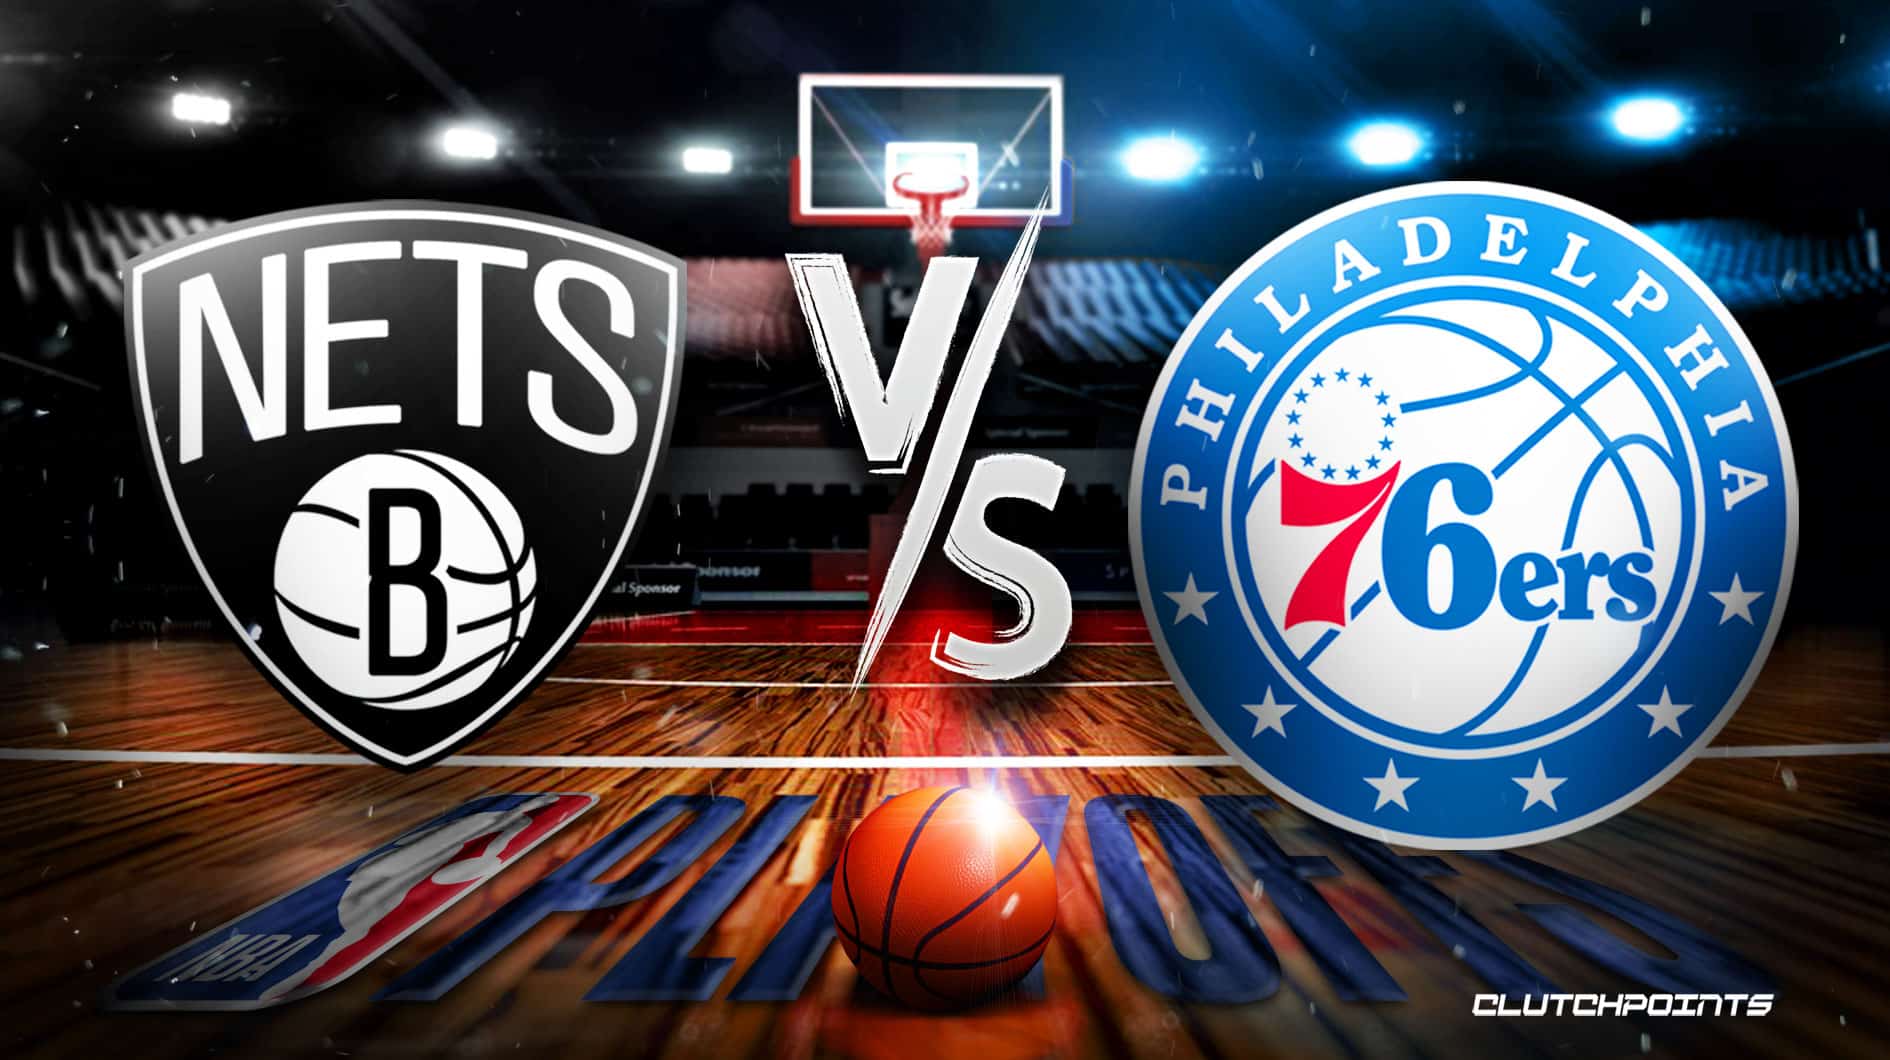 NBA Playoffs Odds Nets-76ers Game 2 prediction, pick, how to watch